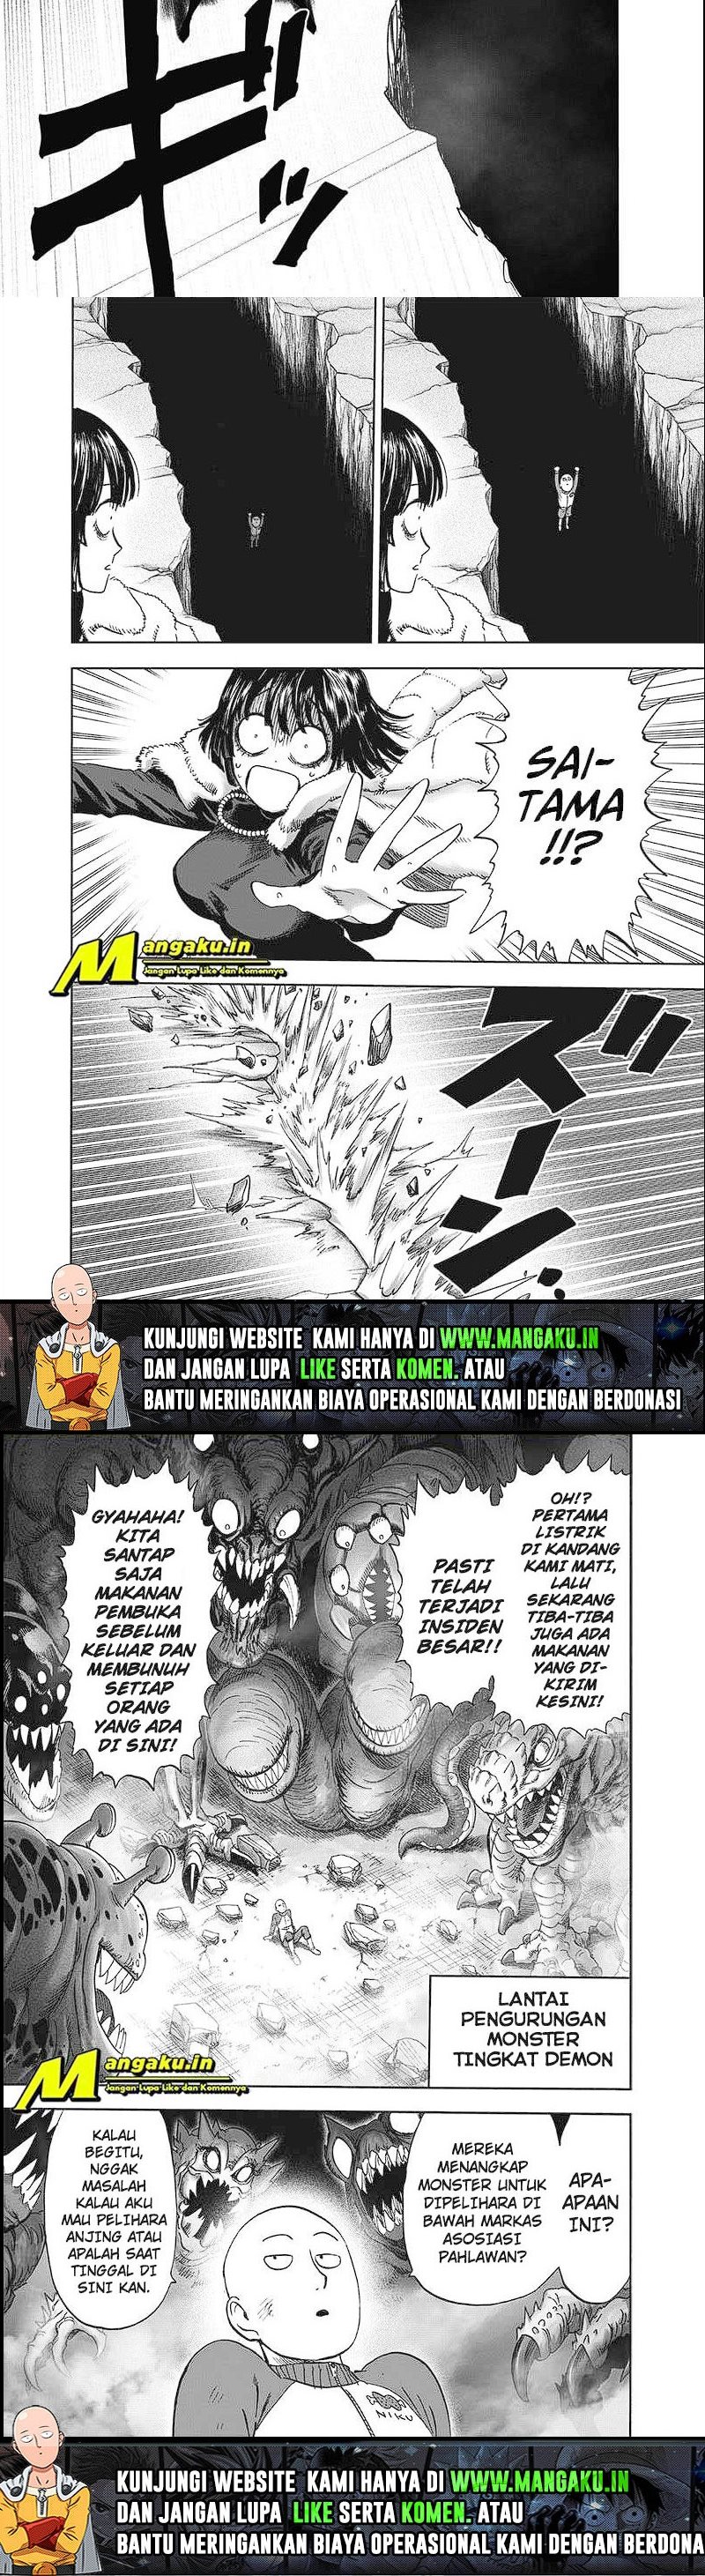 One Punch-Man Chapter 226